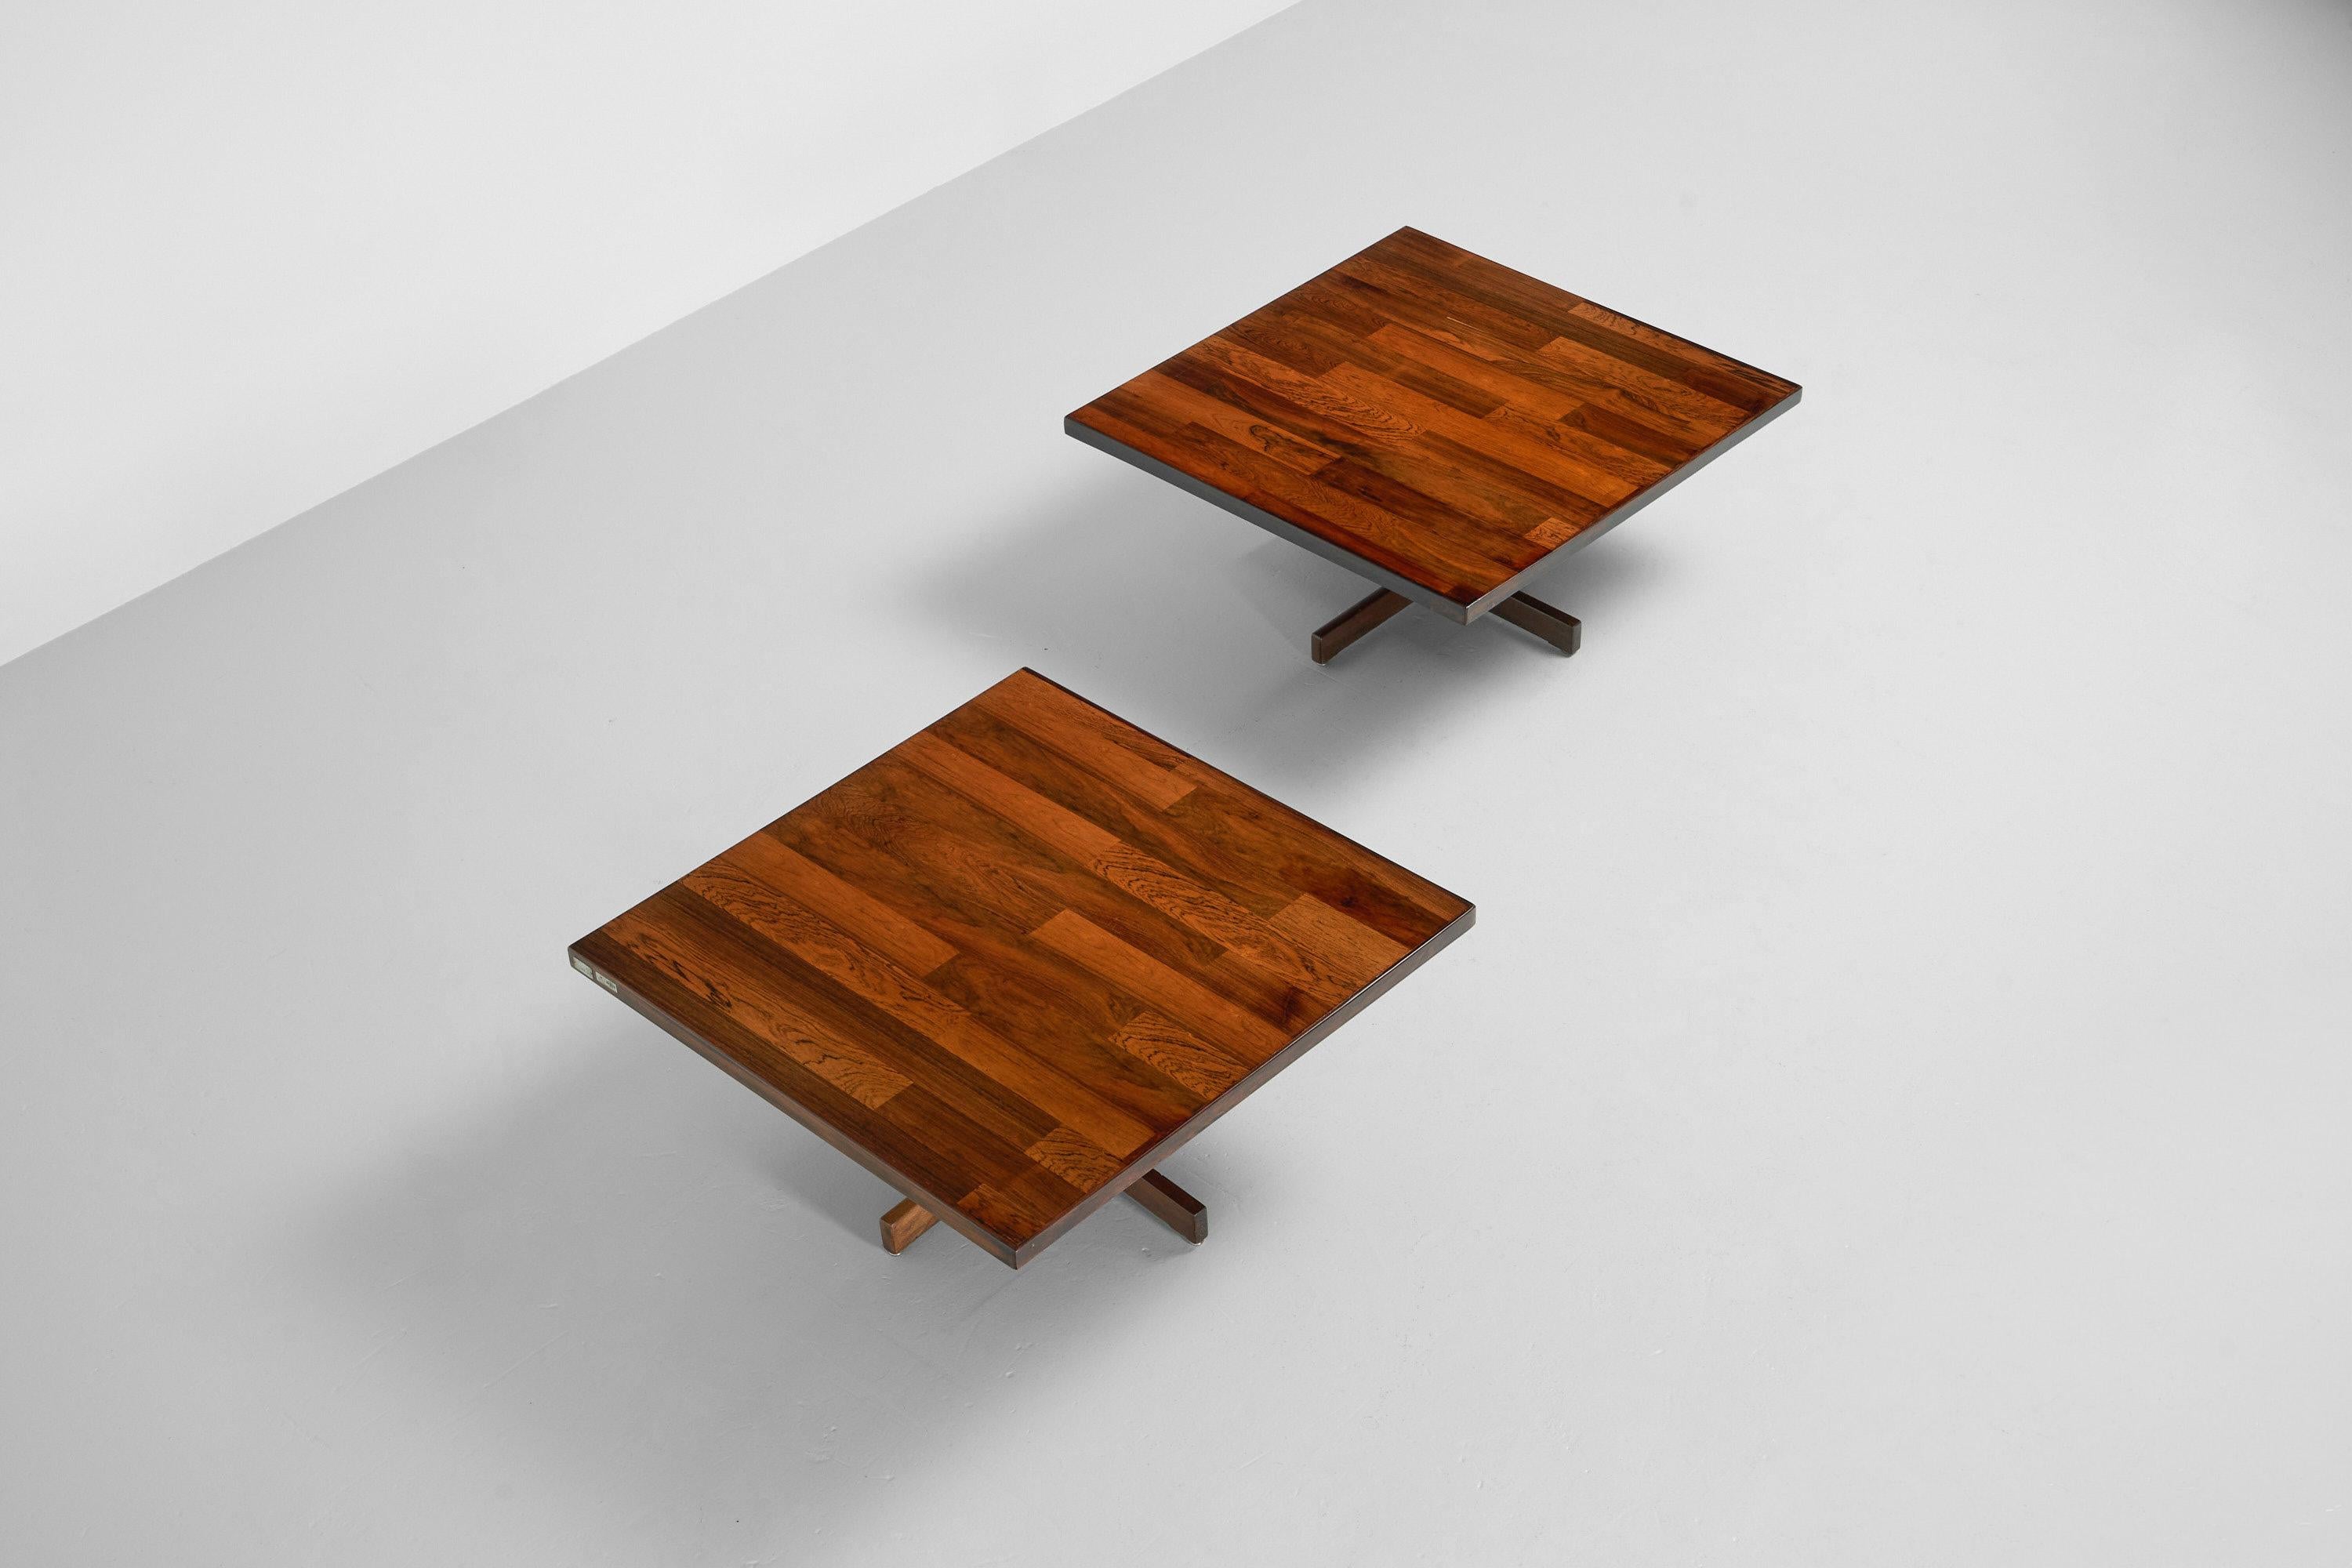 A beautiful pair of Mesa de Centro Chanceler tables designed by Jorge Zalszupin and manufactured by his own company L’Atelier, Brazil 1959. The Mesa de Centro Chanceler or Chancelers’ table is a modest sized coffee table that can be found in